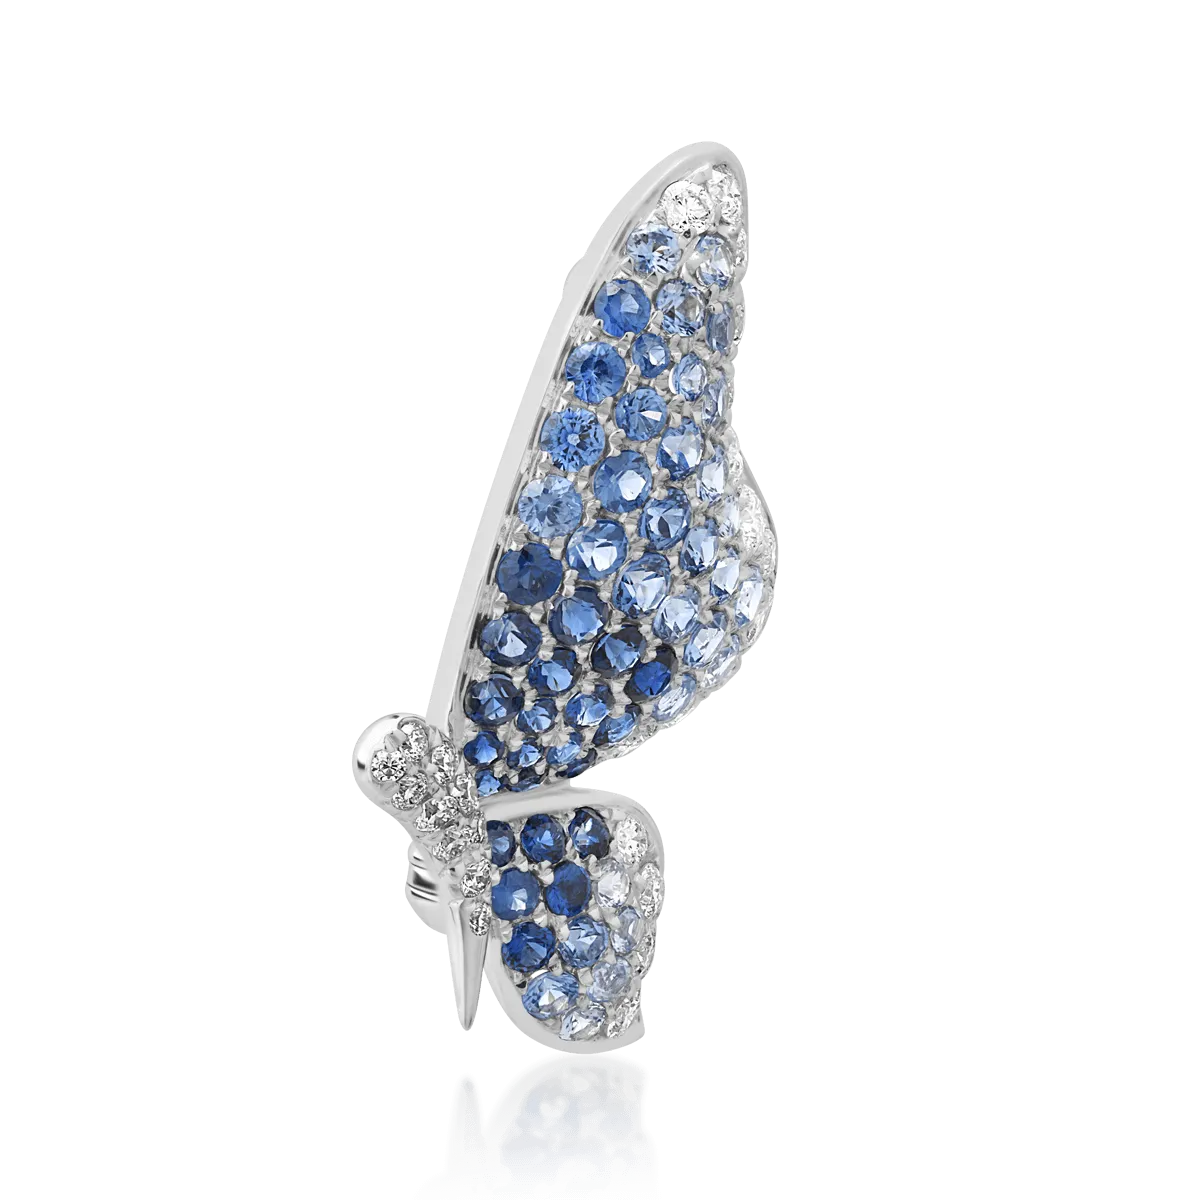 18K white gold brooch with 1.14ct blue sapphires and 0.37ct diamonds